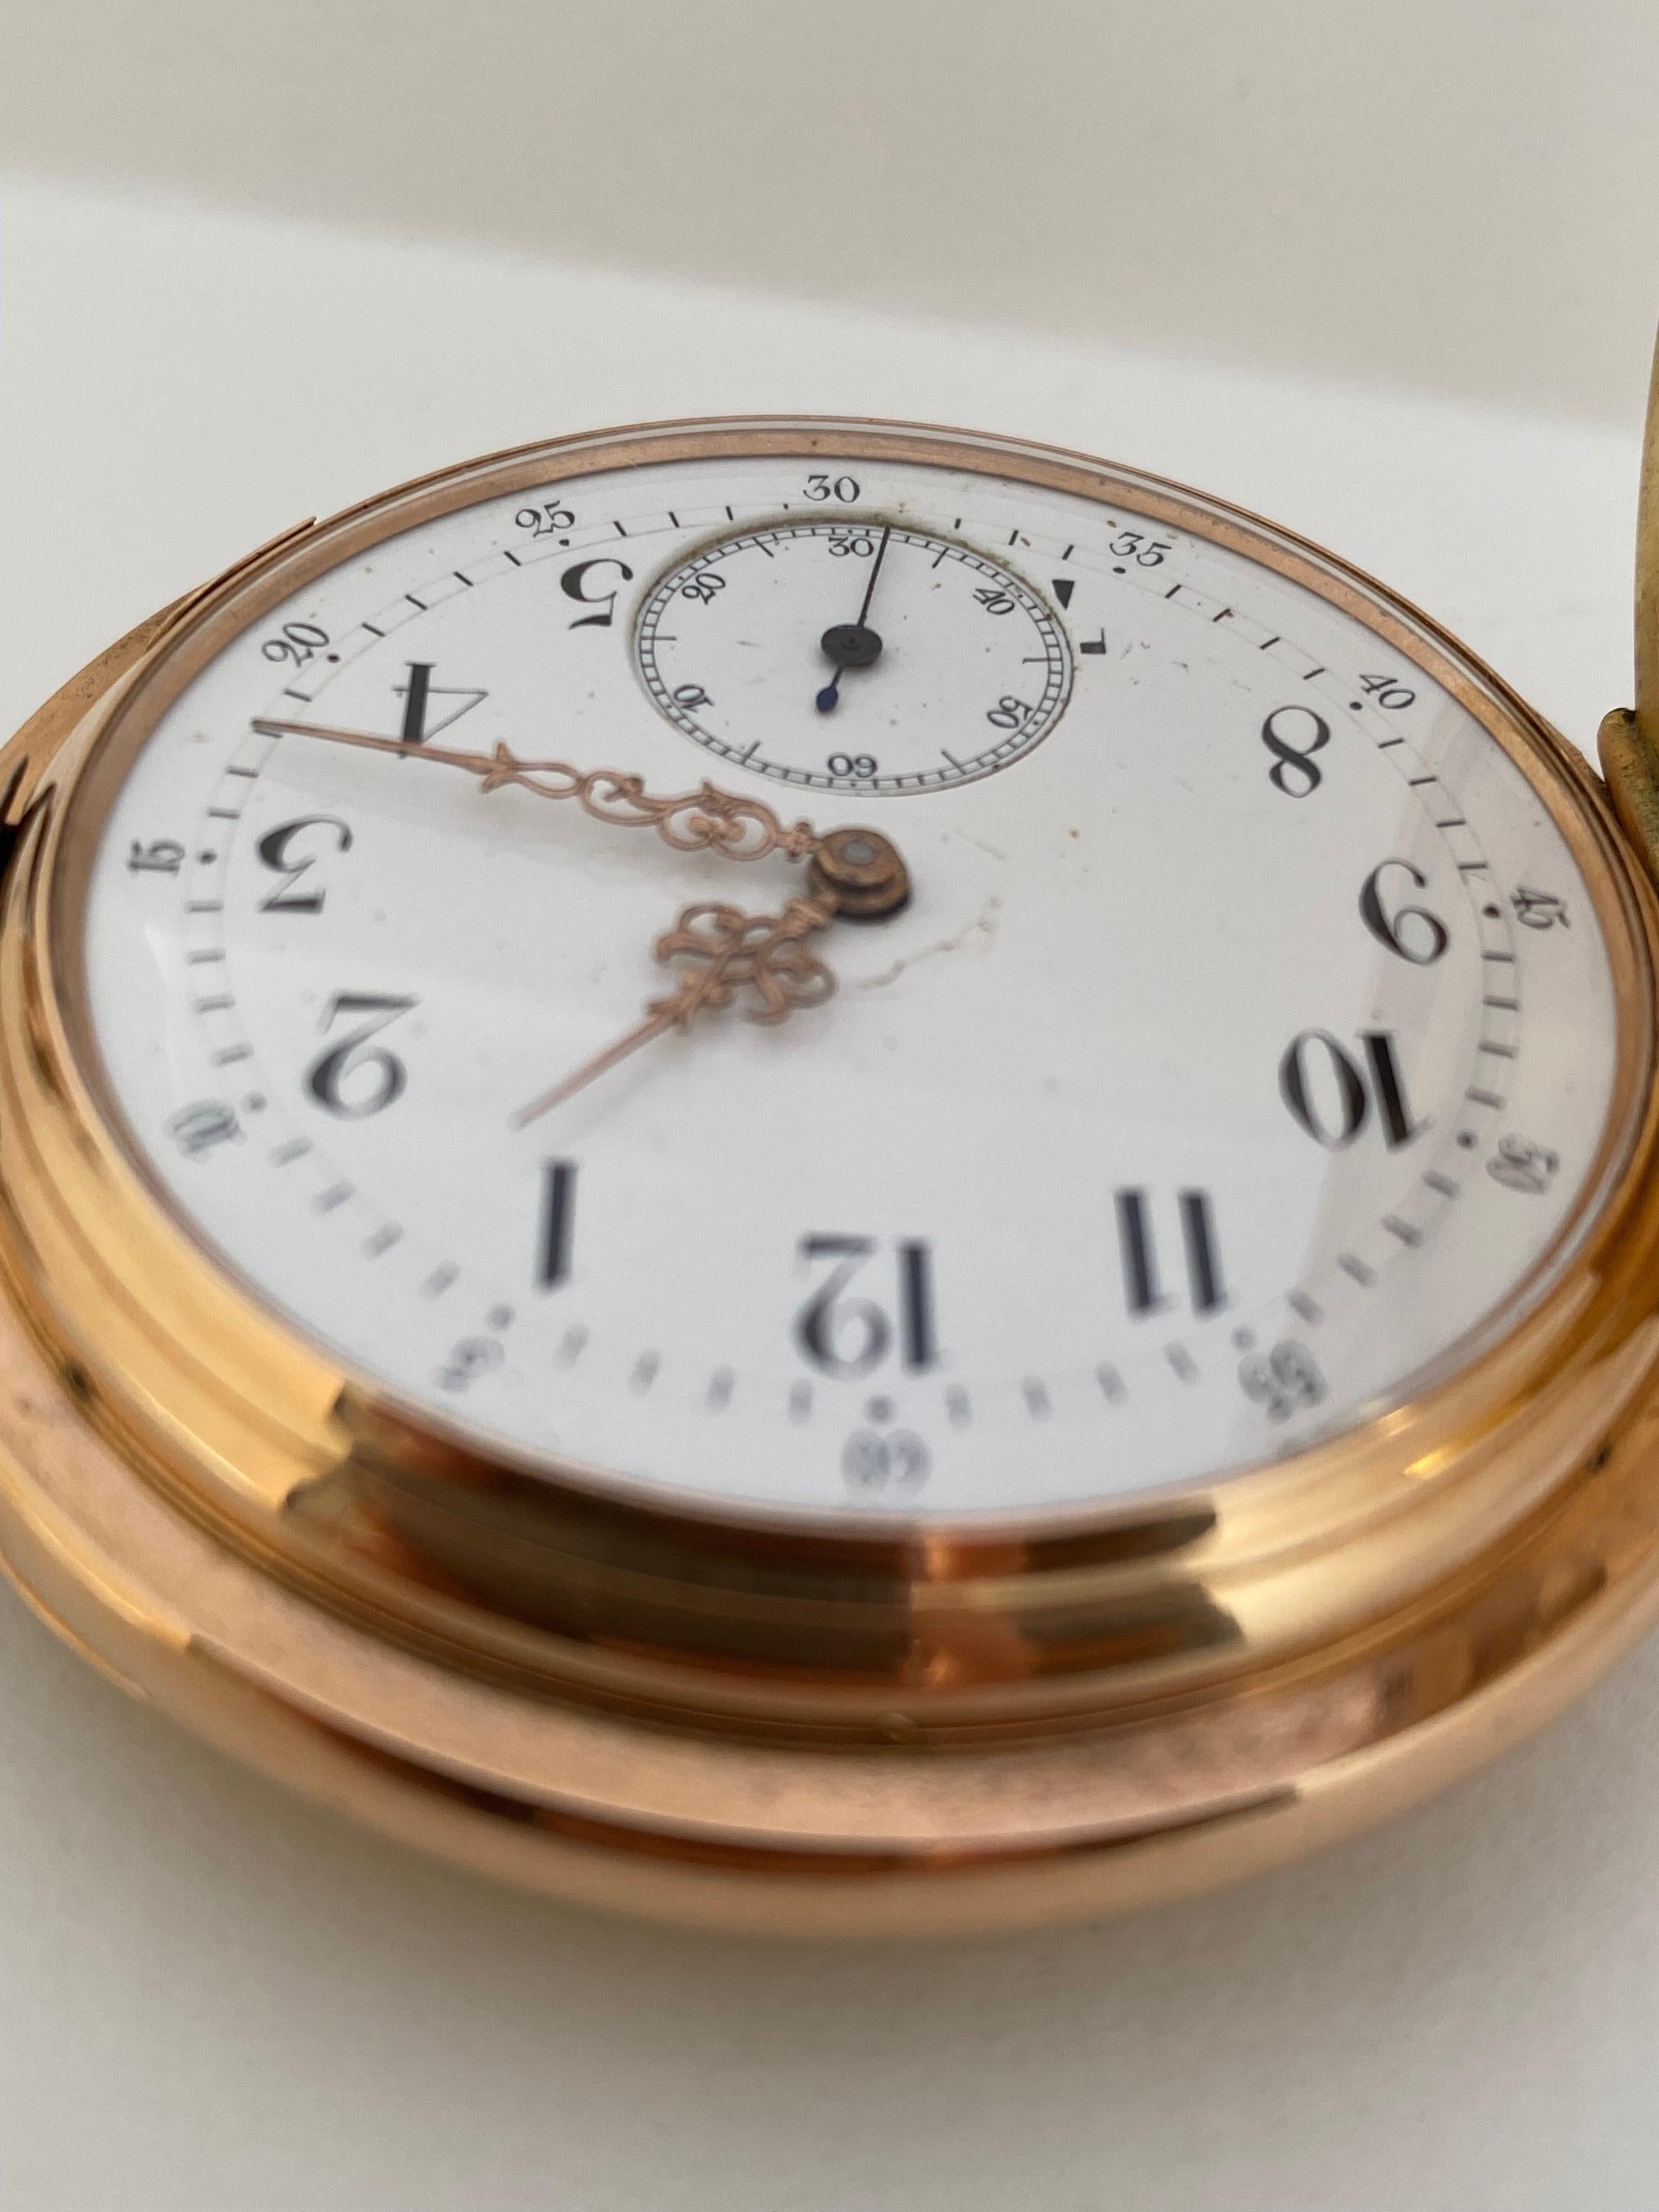 Antique 14 Karat Gold Full Hunter LeCoultre & Co. Minute Repeater Pocket Watch For Sale 10